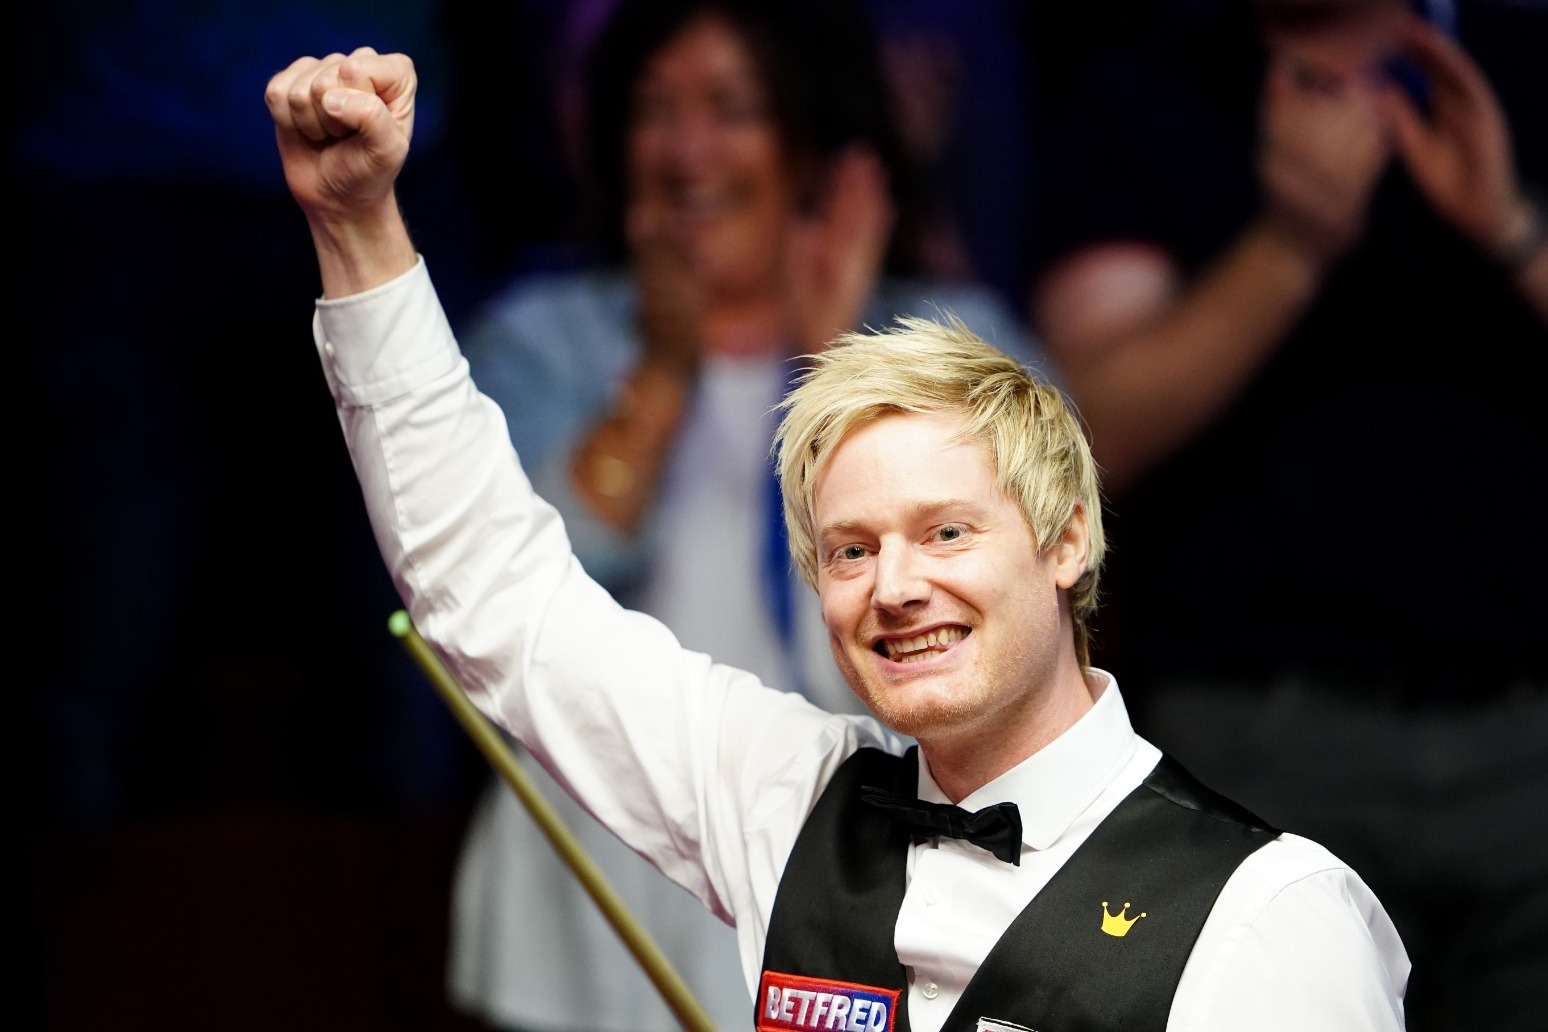 Neil Robertson fires the 12th 147 break in World Snooker Championship history 